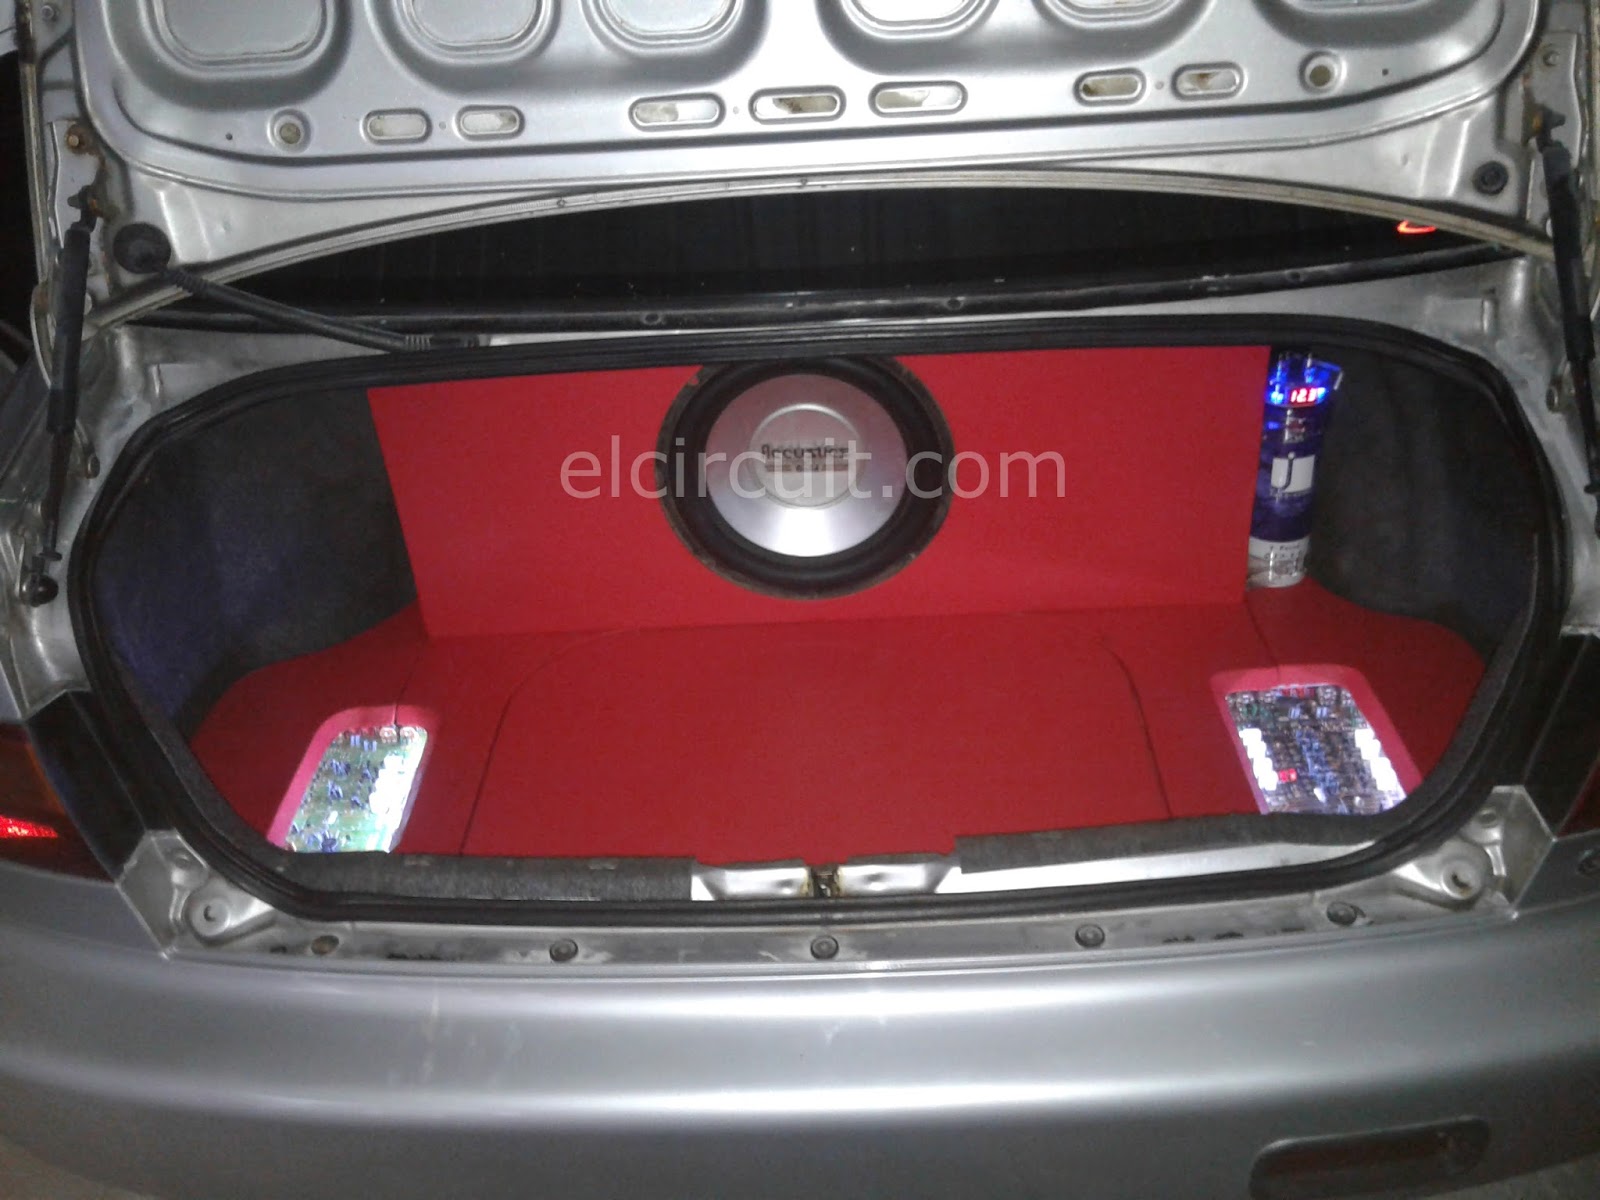 Best car audio setup for Sound Quality - Electronic Circuit